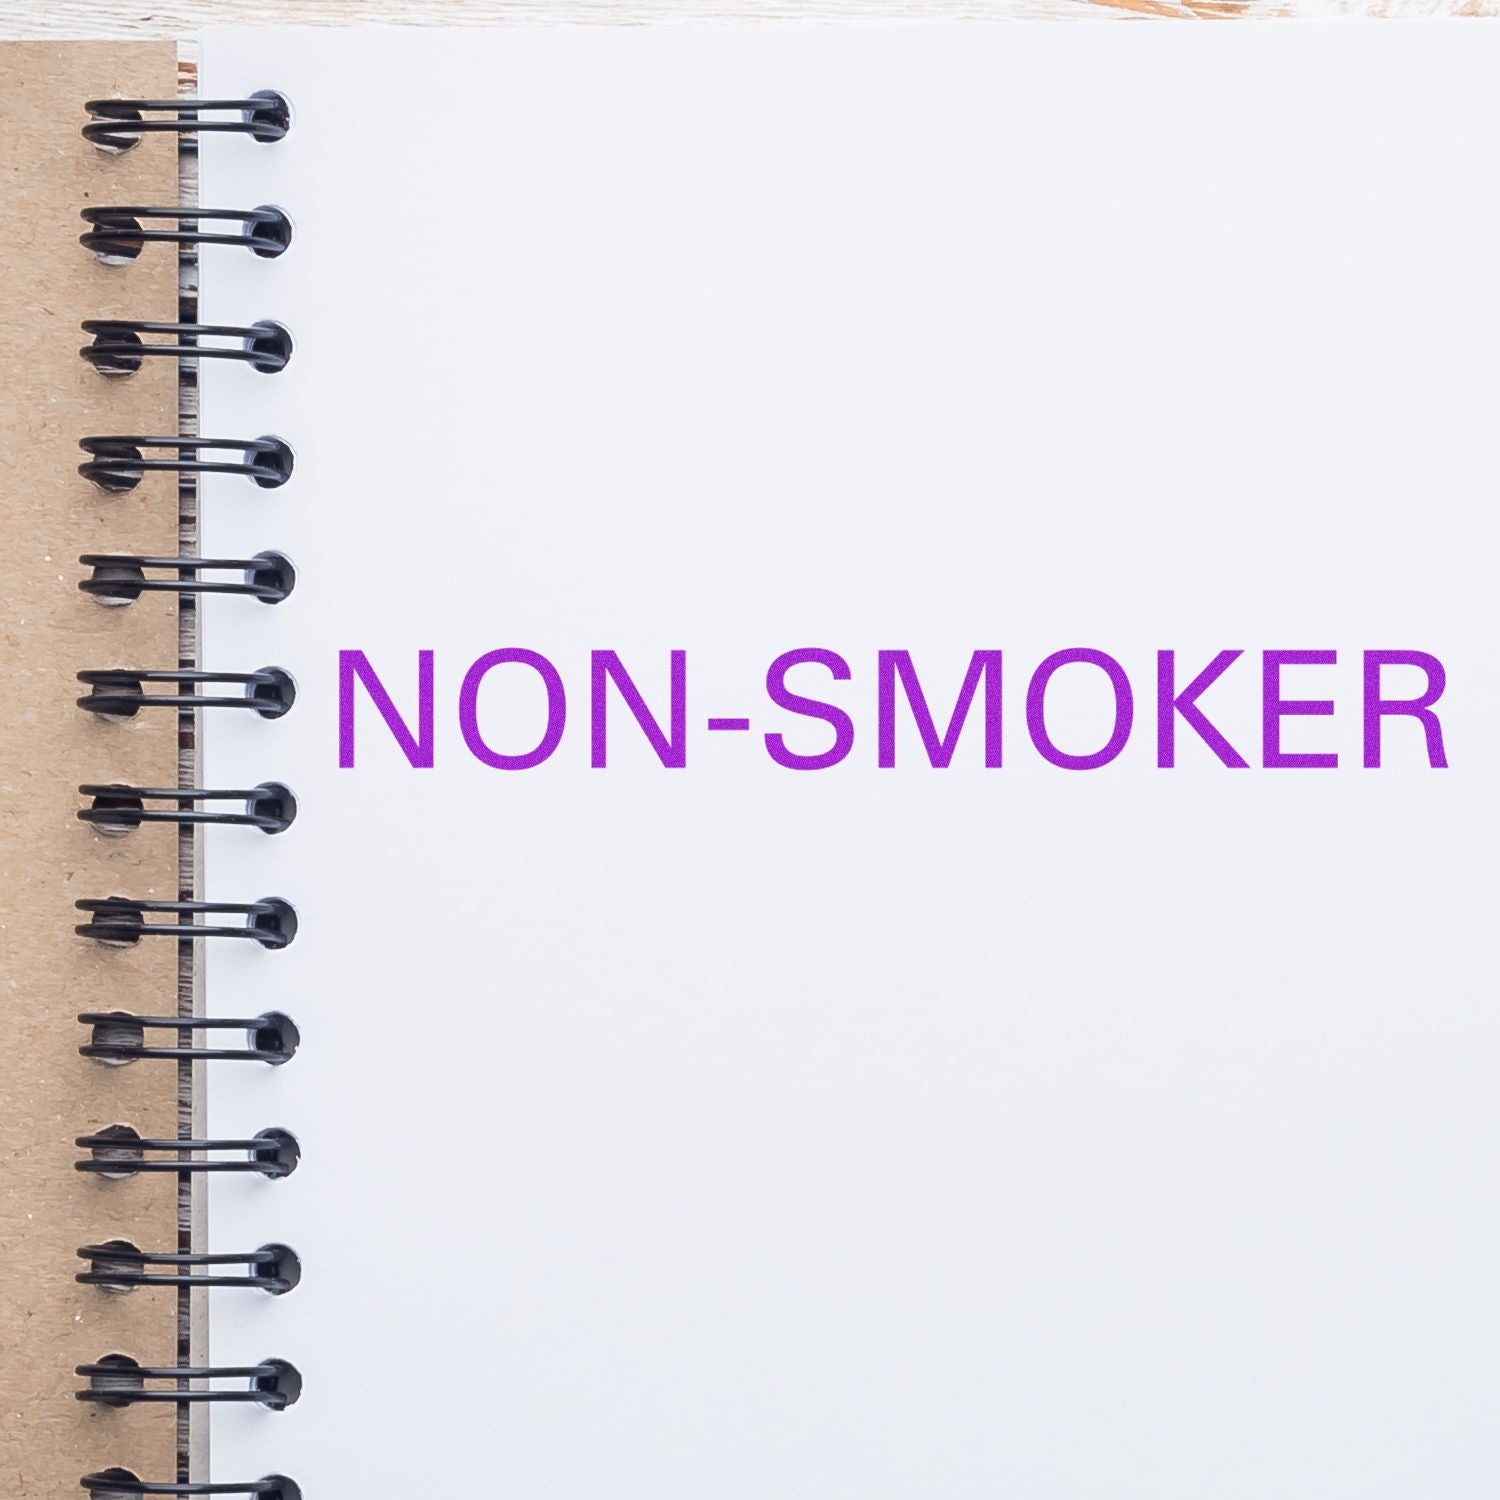 Large Non-Smoker Rubber Stamp In Use